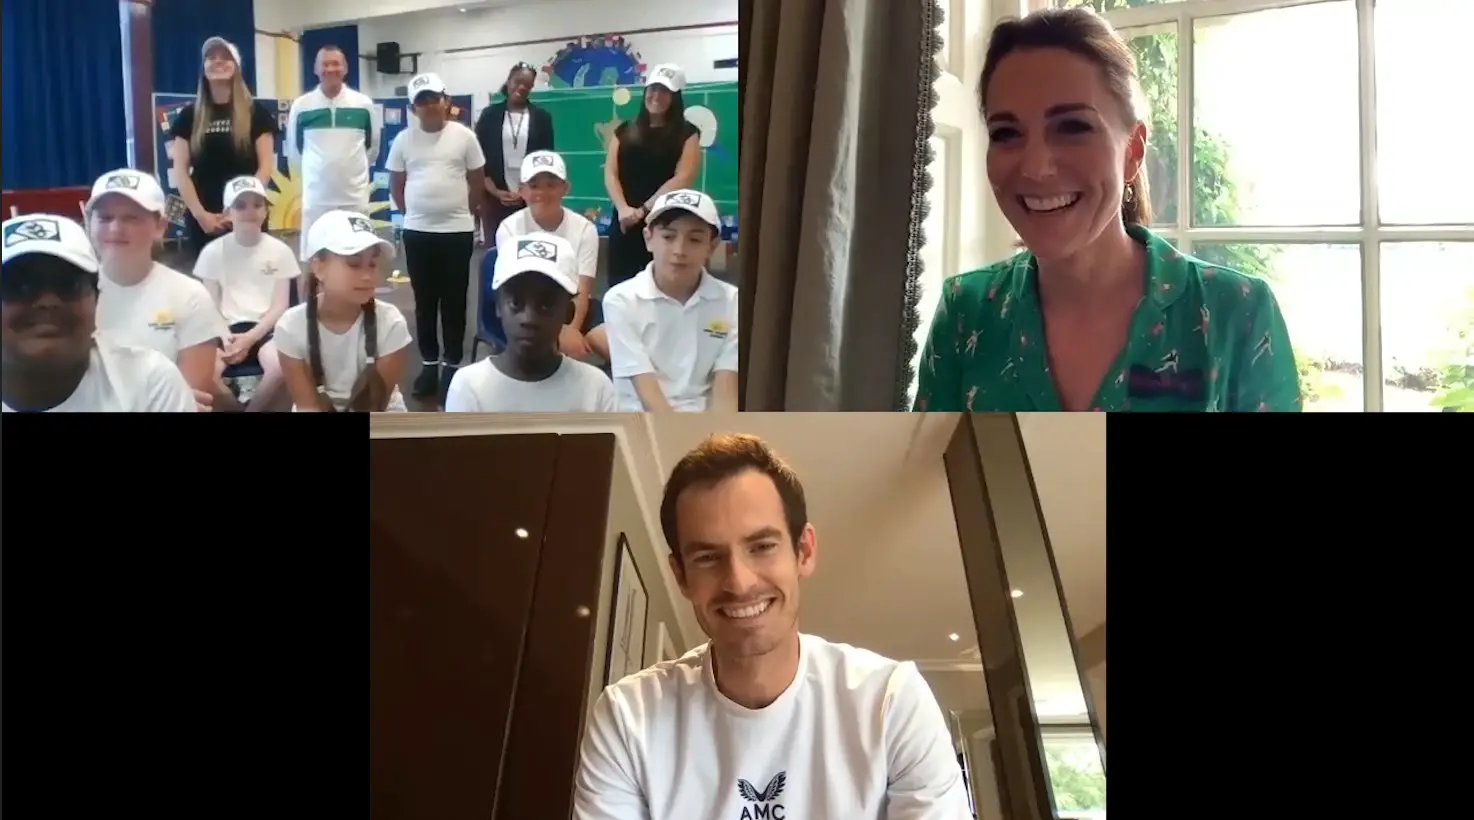 The Duchess of Cambridge joined Tennis chamption Andy Murray and school kids for a video call